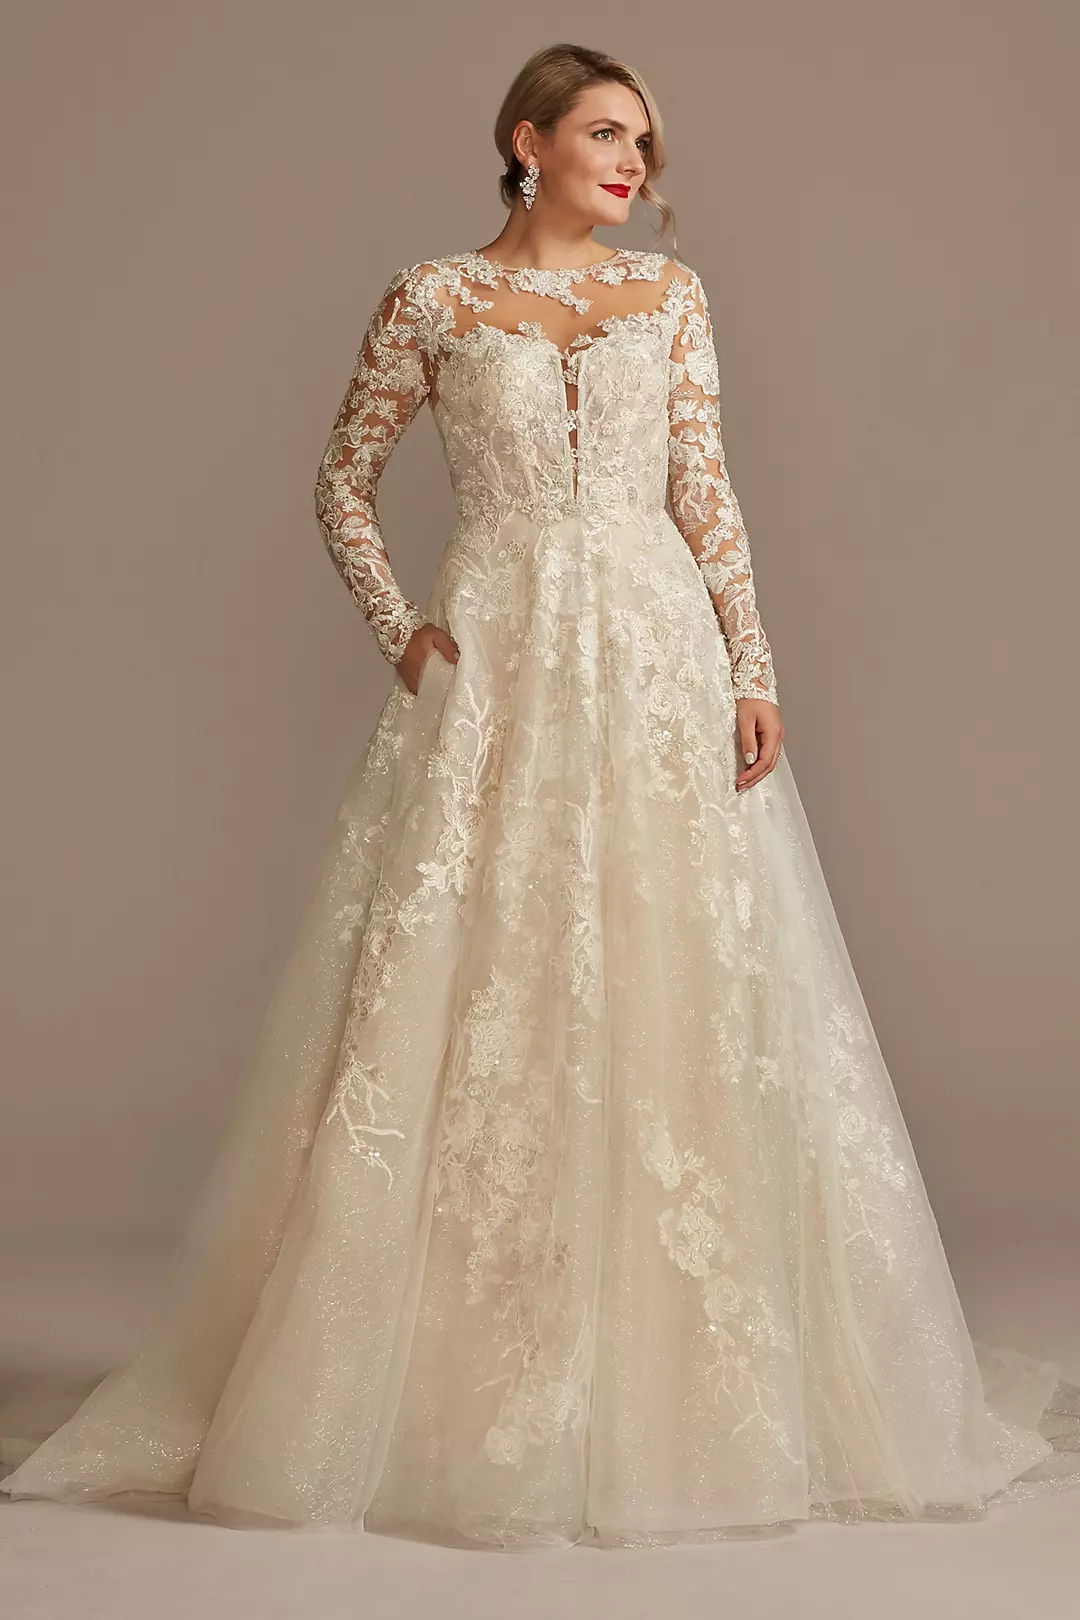 Lace Illusion Long Sleeve Ball Gown Wedding Dress Image